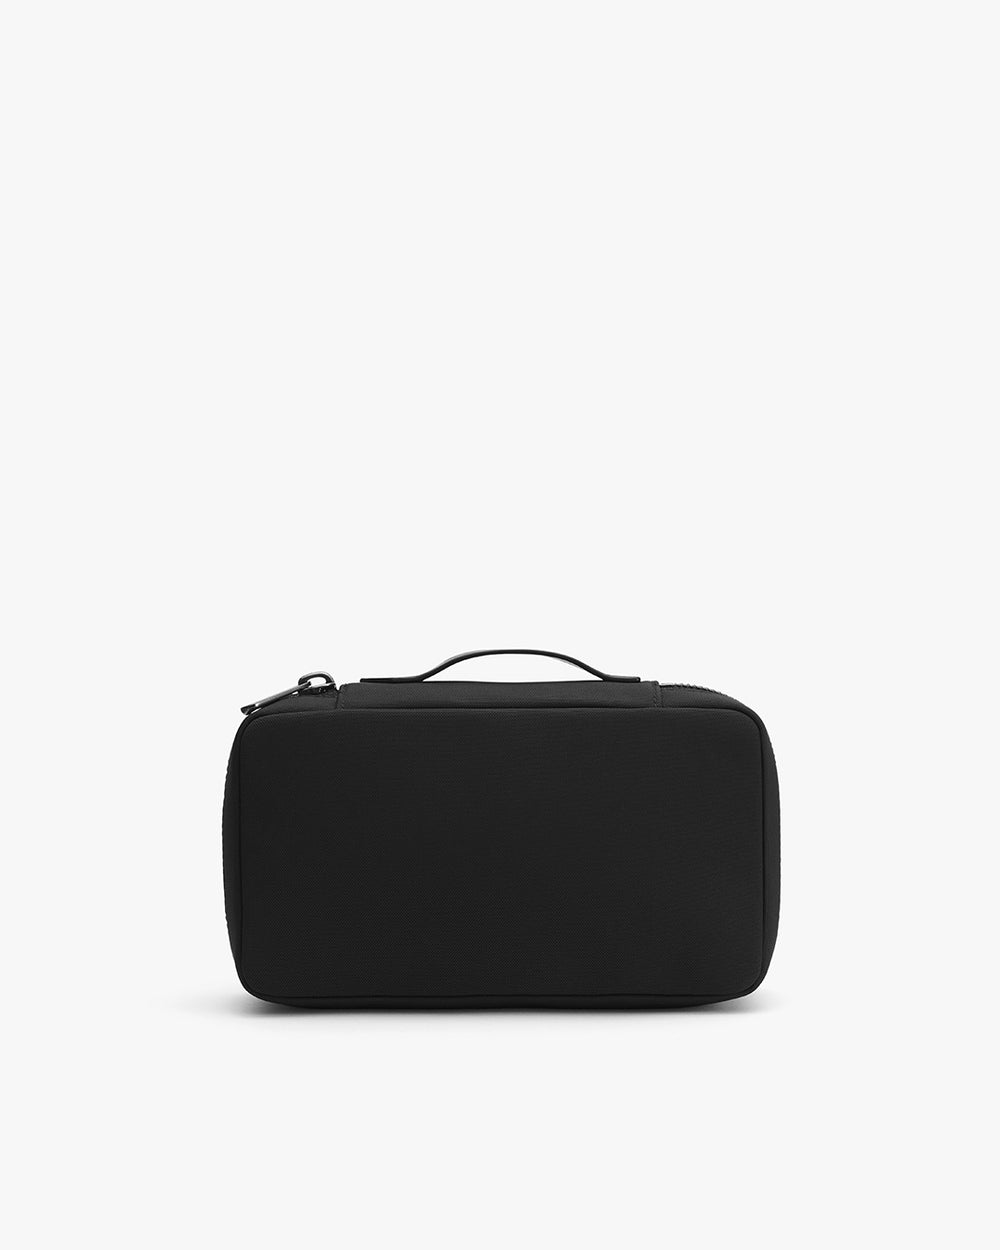 Rectangular bag with handle and zipper on plain background.